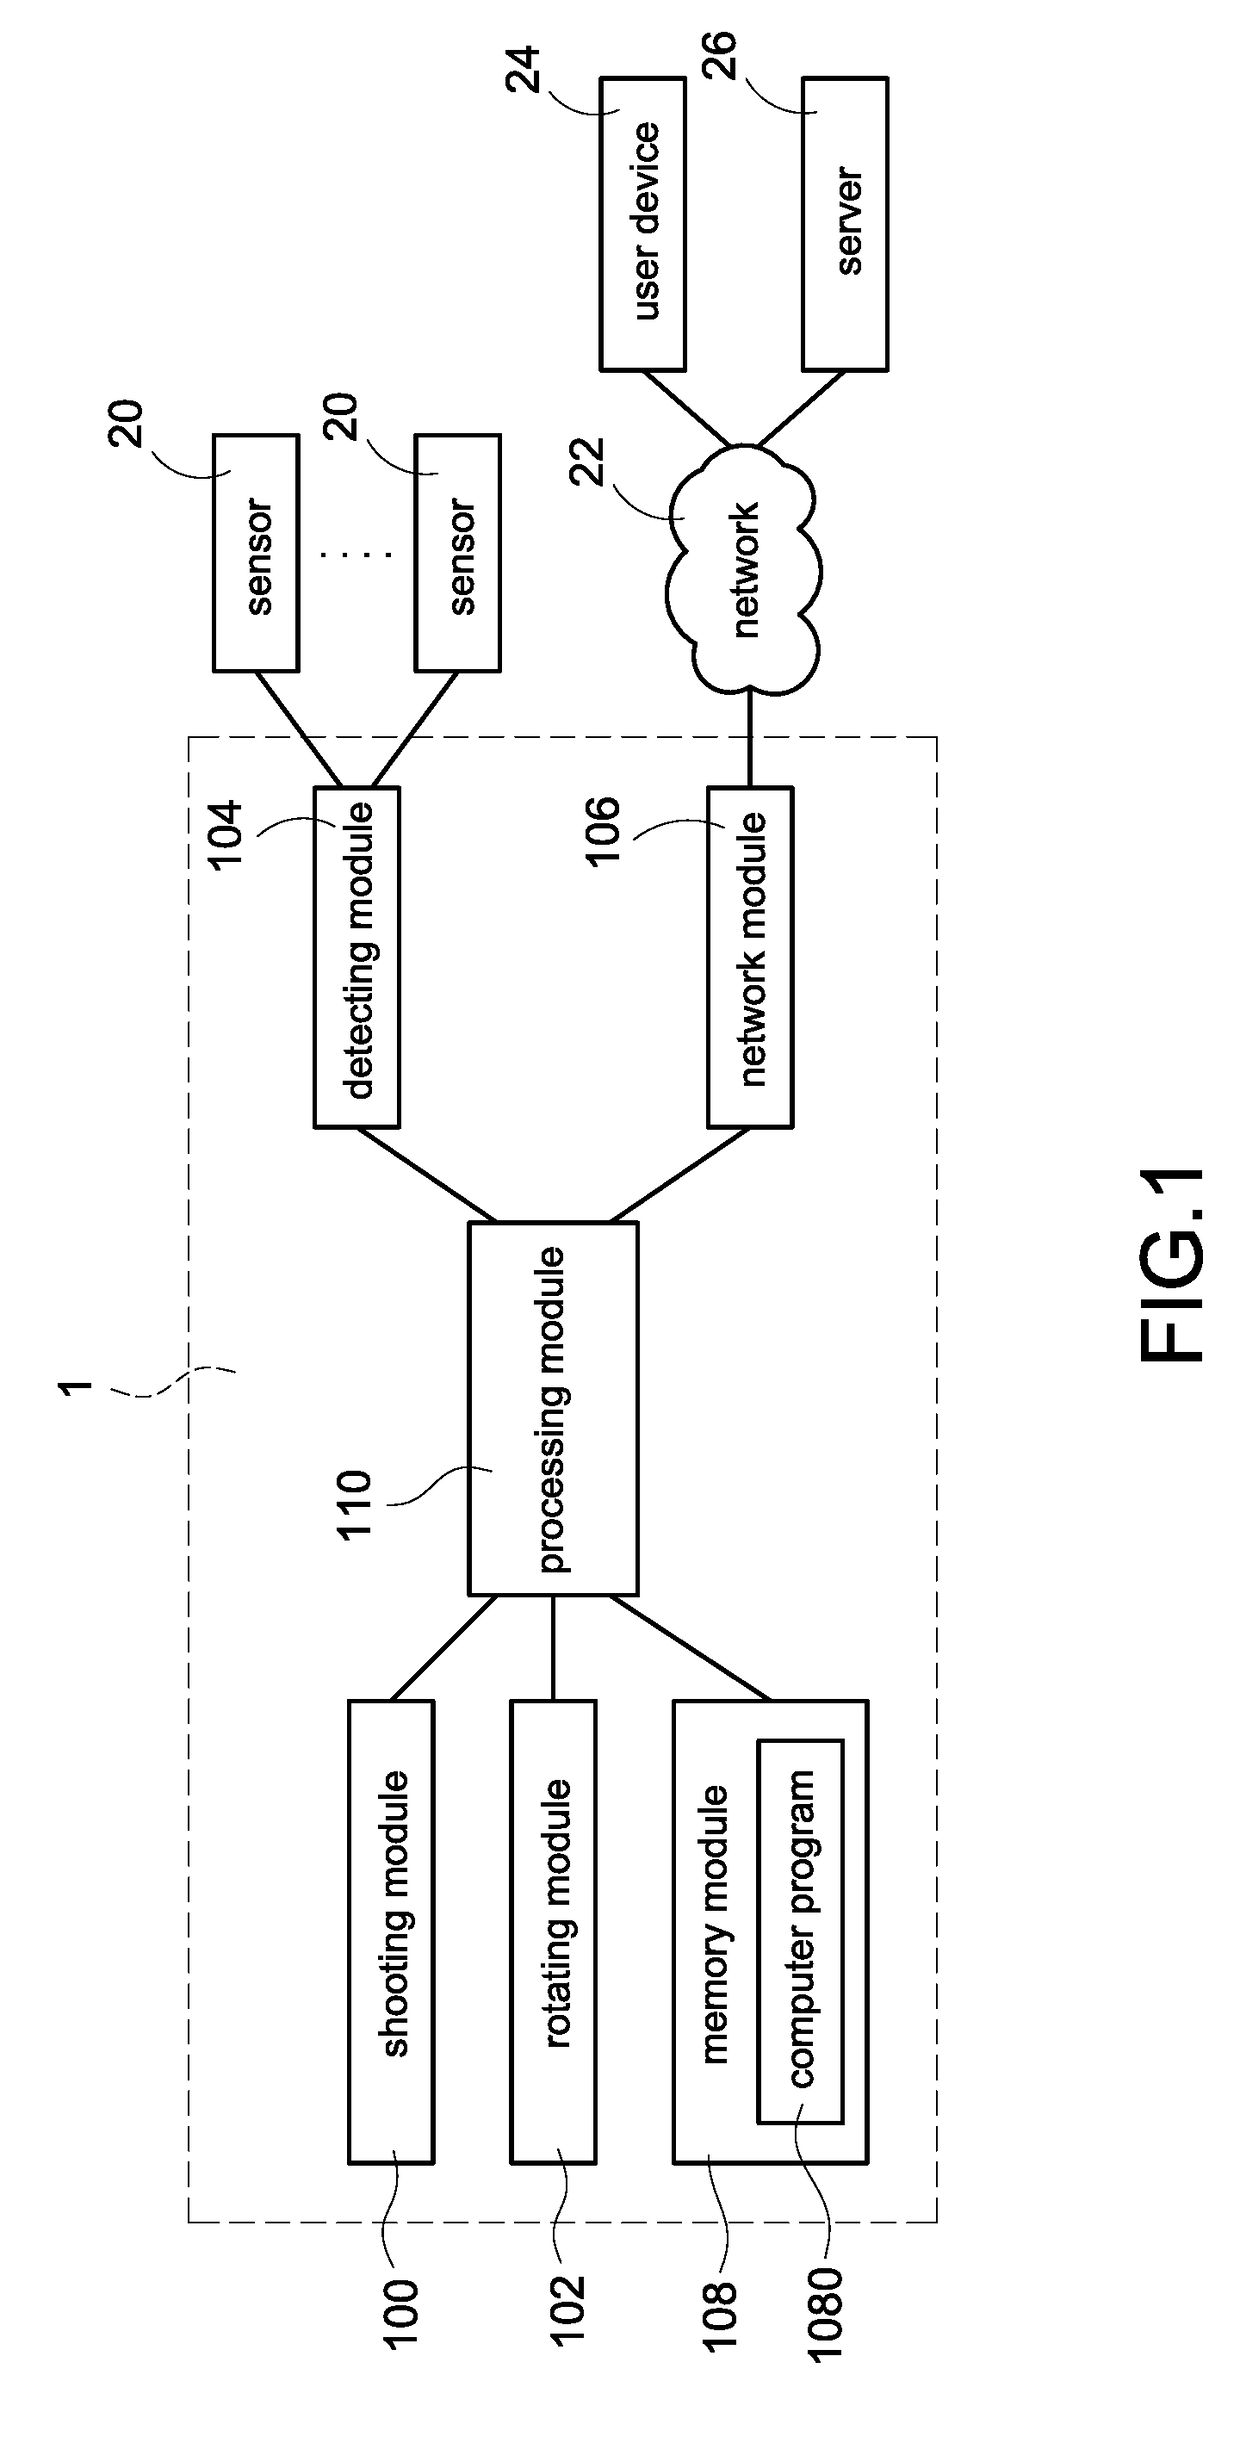 Method of configuring and adjusting frame coverage for rotatable camera